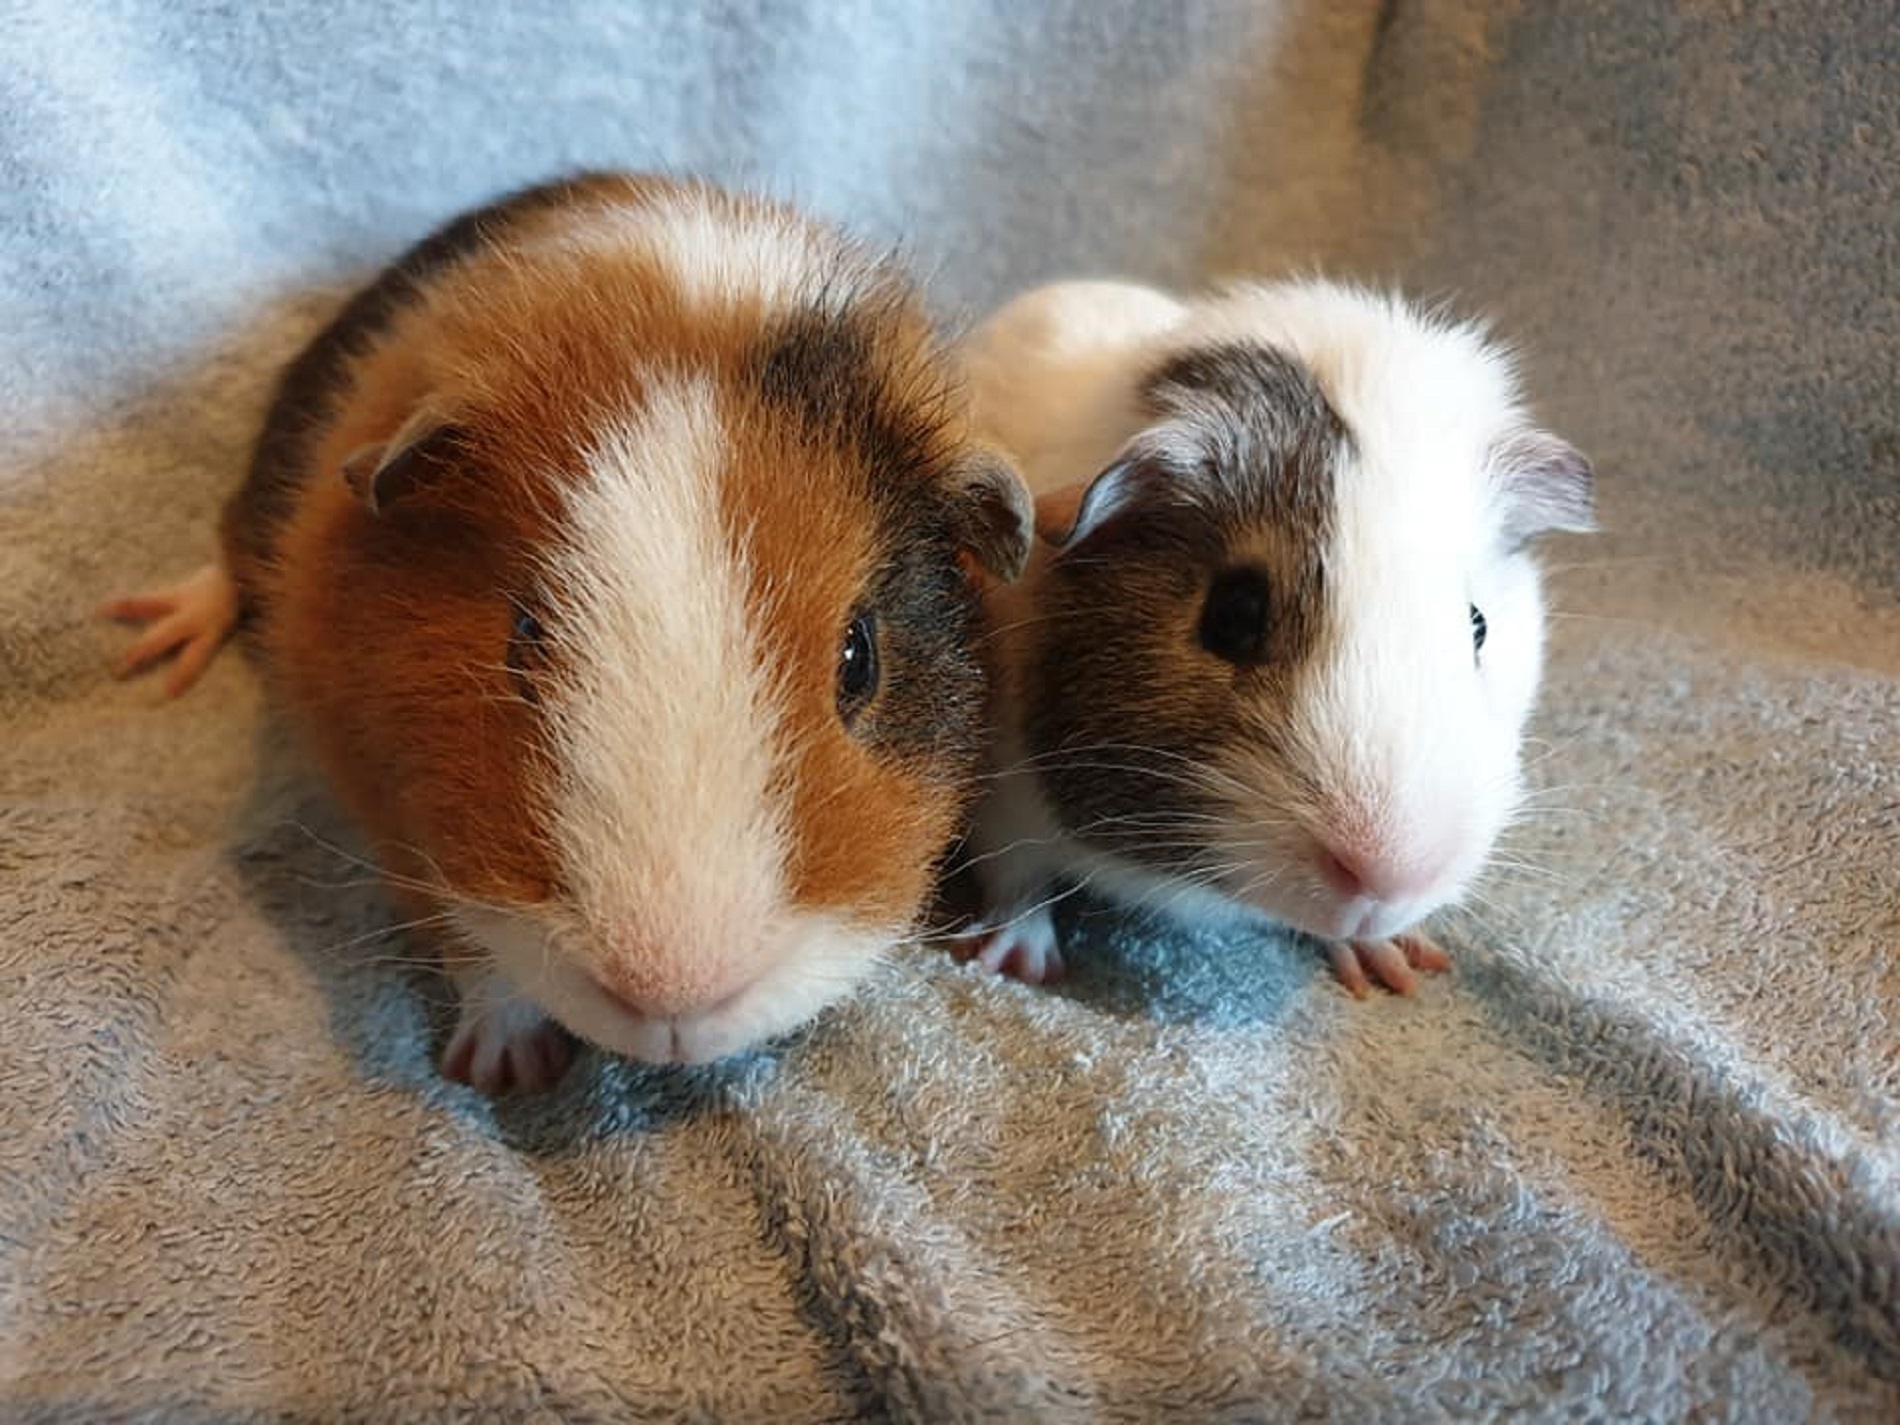 Basil & Herby (were Puffy & Snowy) April 22nd 2020